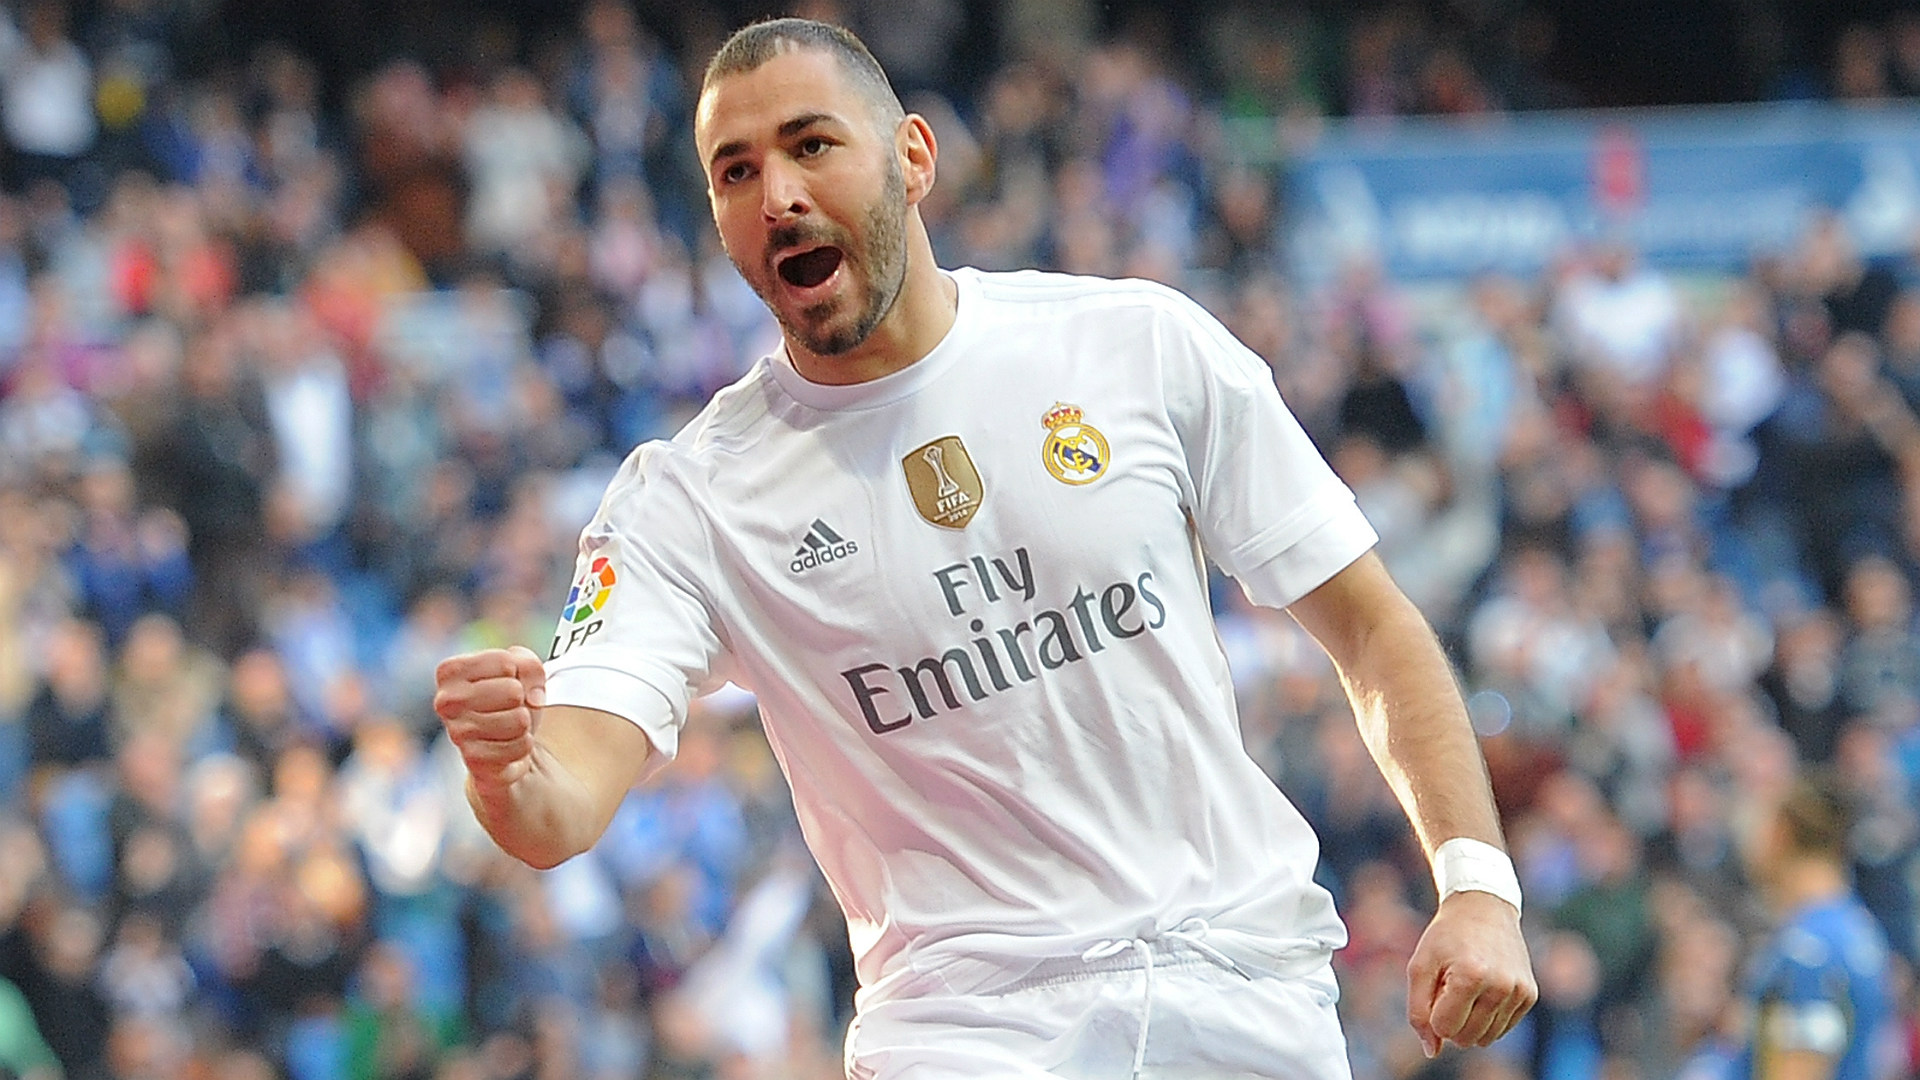 the best striker for madrid is benzema